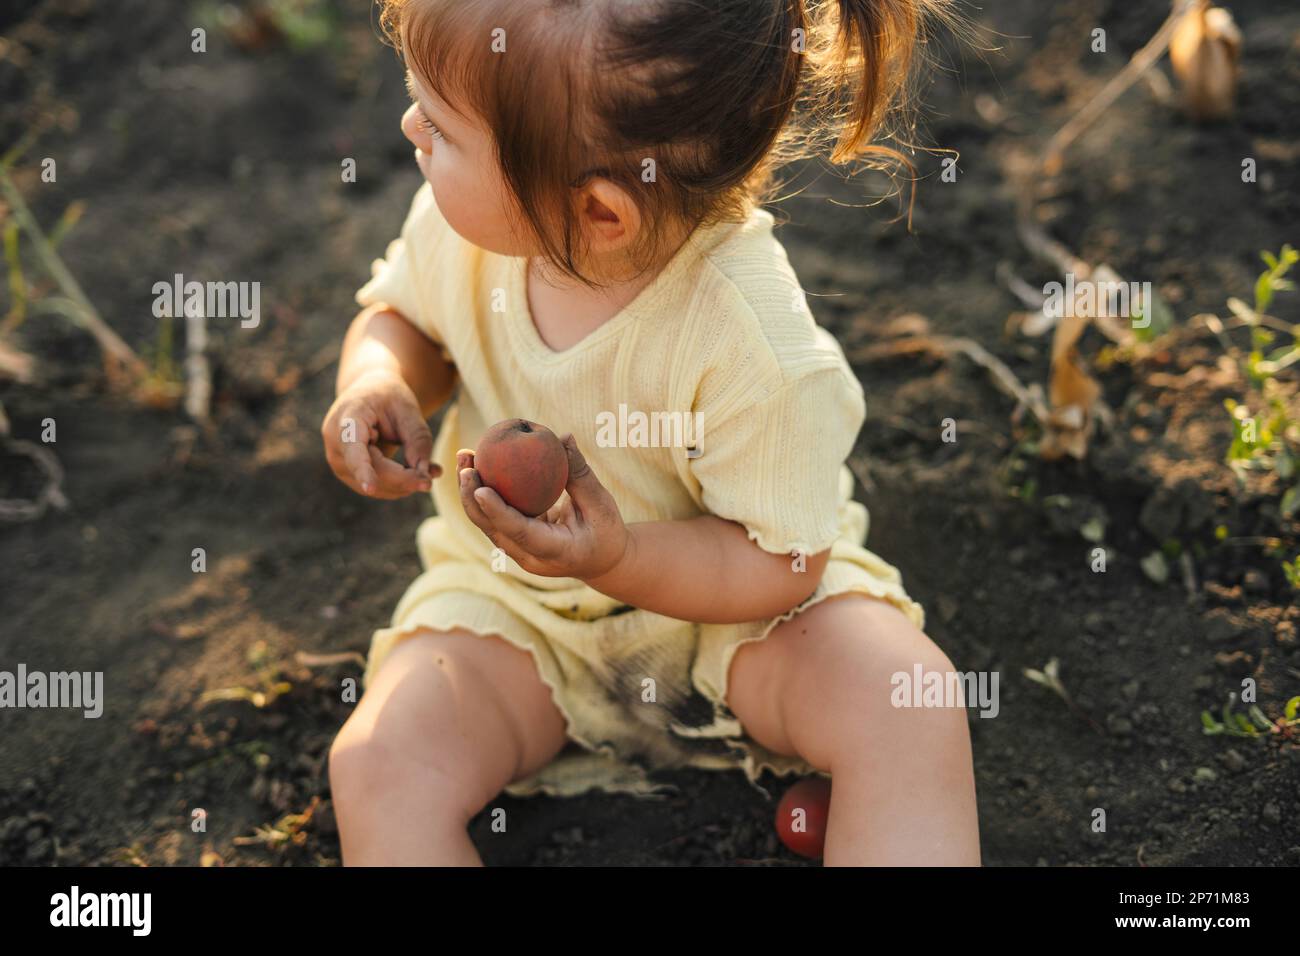 Baby girl holding a tomatoe in hand and looking away sitting on the ground with the desire to eat it. Dirty unwashed fruit. Nature summer. Garden Stock Photo